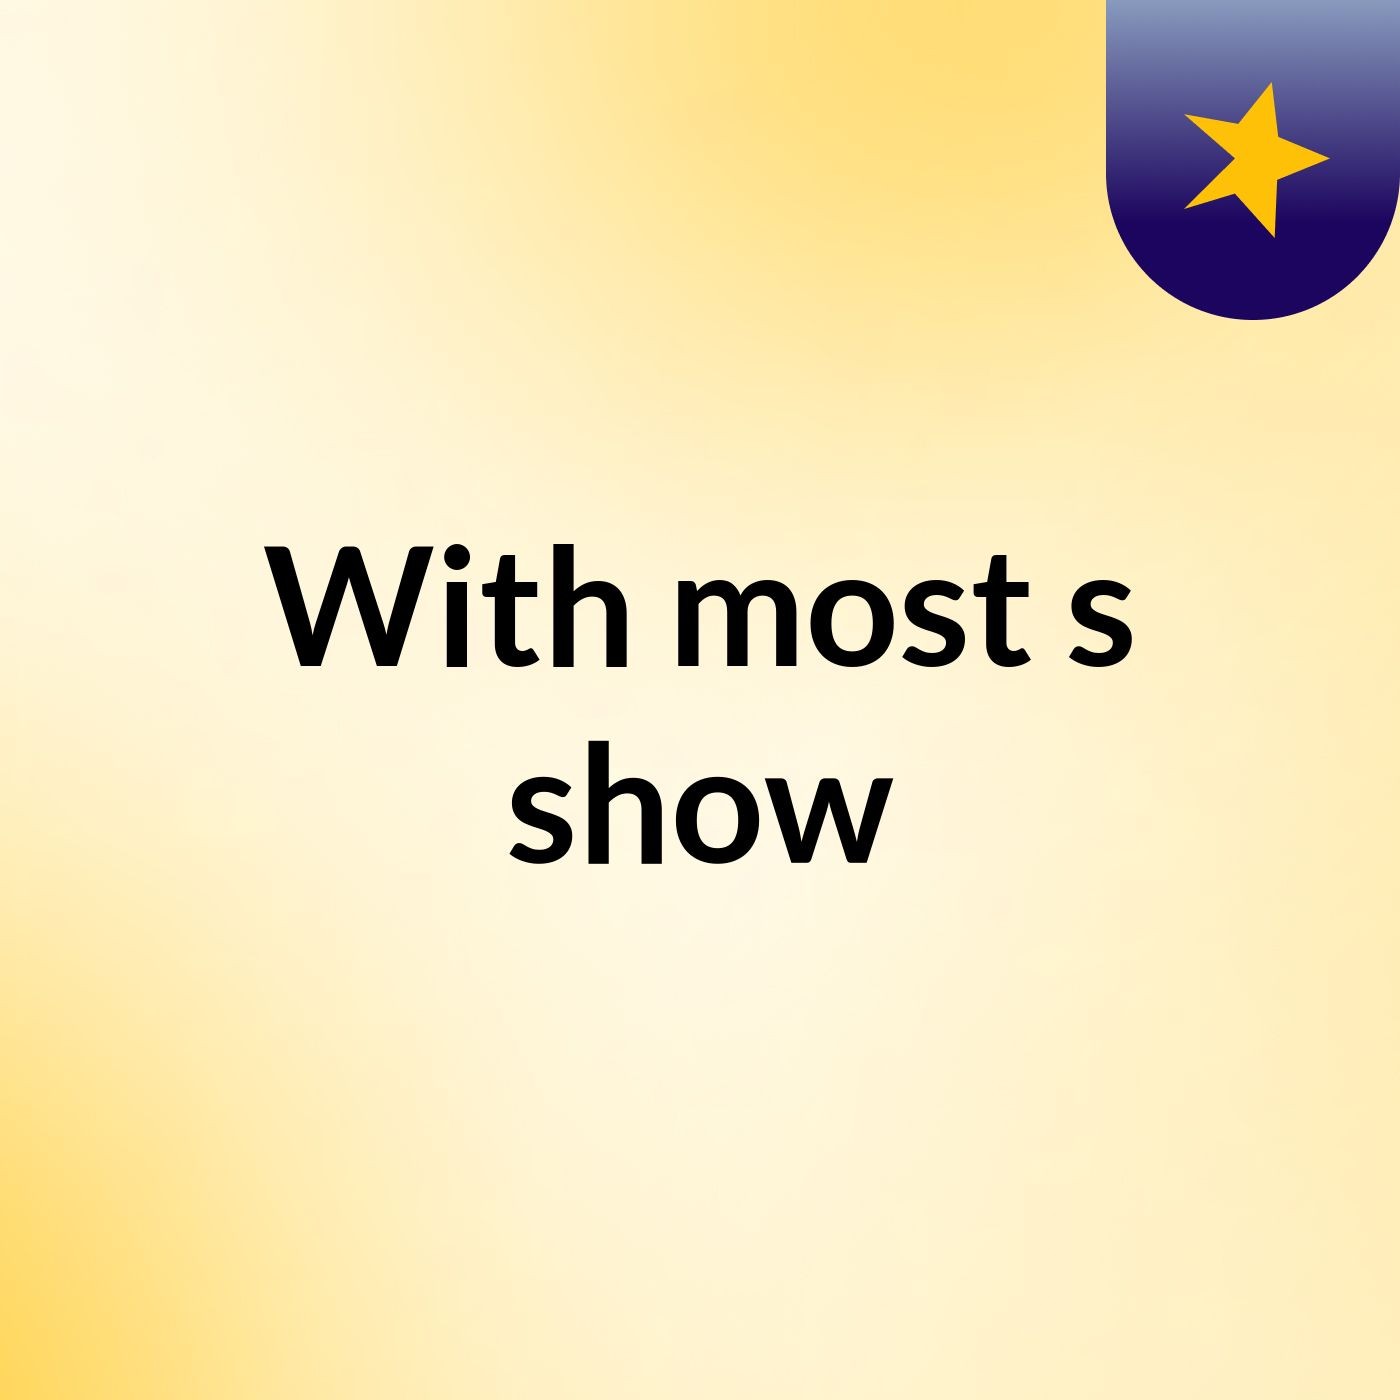 With most's show